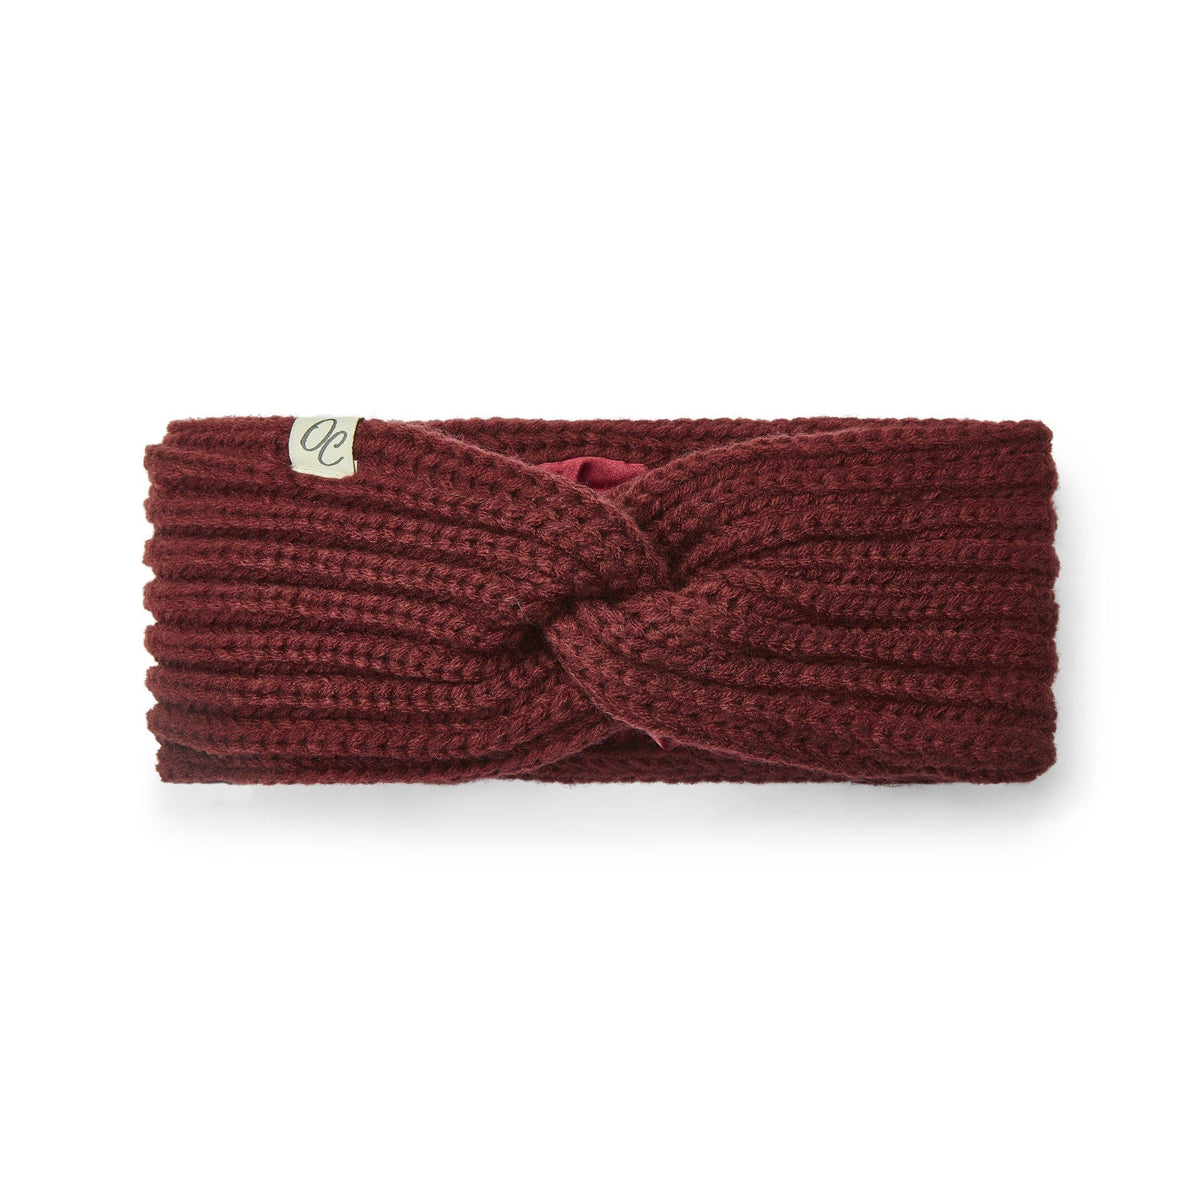 Only Curls Satin Lined Knitted Headband - Burgundy - Only Curls